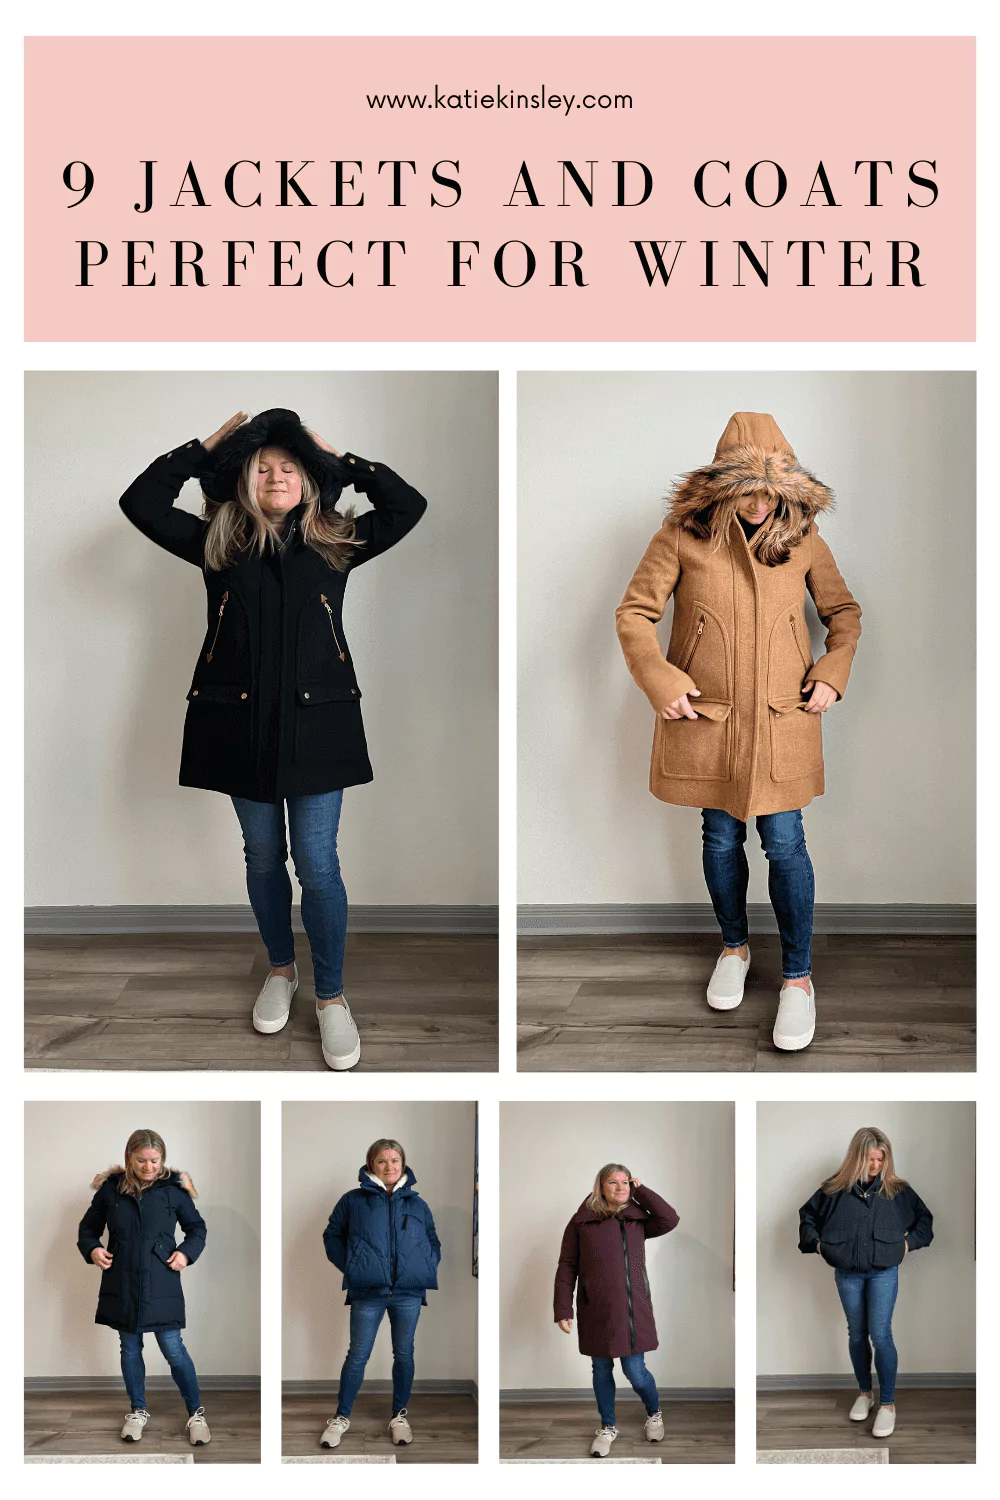 9 Jackets and Coats Perfect For Winter Katie Kinsley Pinterest Pin